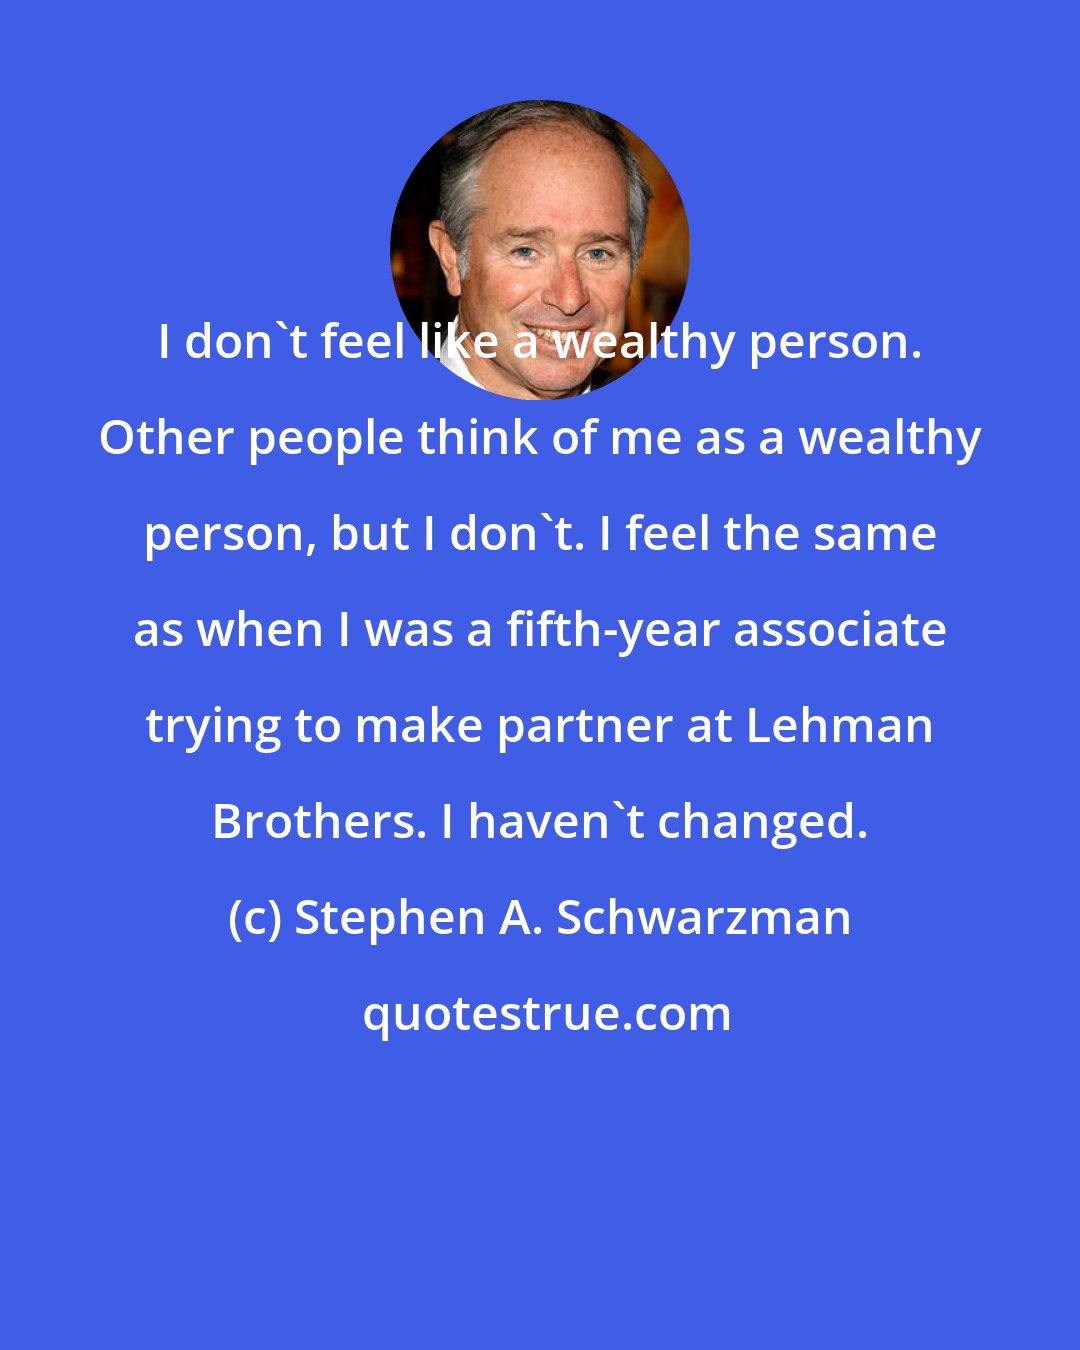 Stephen A. Schwarzman: I don't feel like a wealthy person. Other people think of me as a wealthy person, but I don't. I feel the same as when I was a fifth-year associate trying to make partner at Lehman Brothers. I haven't changed.